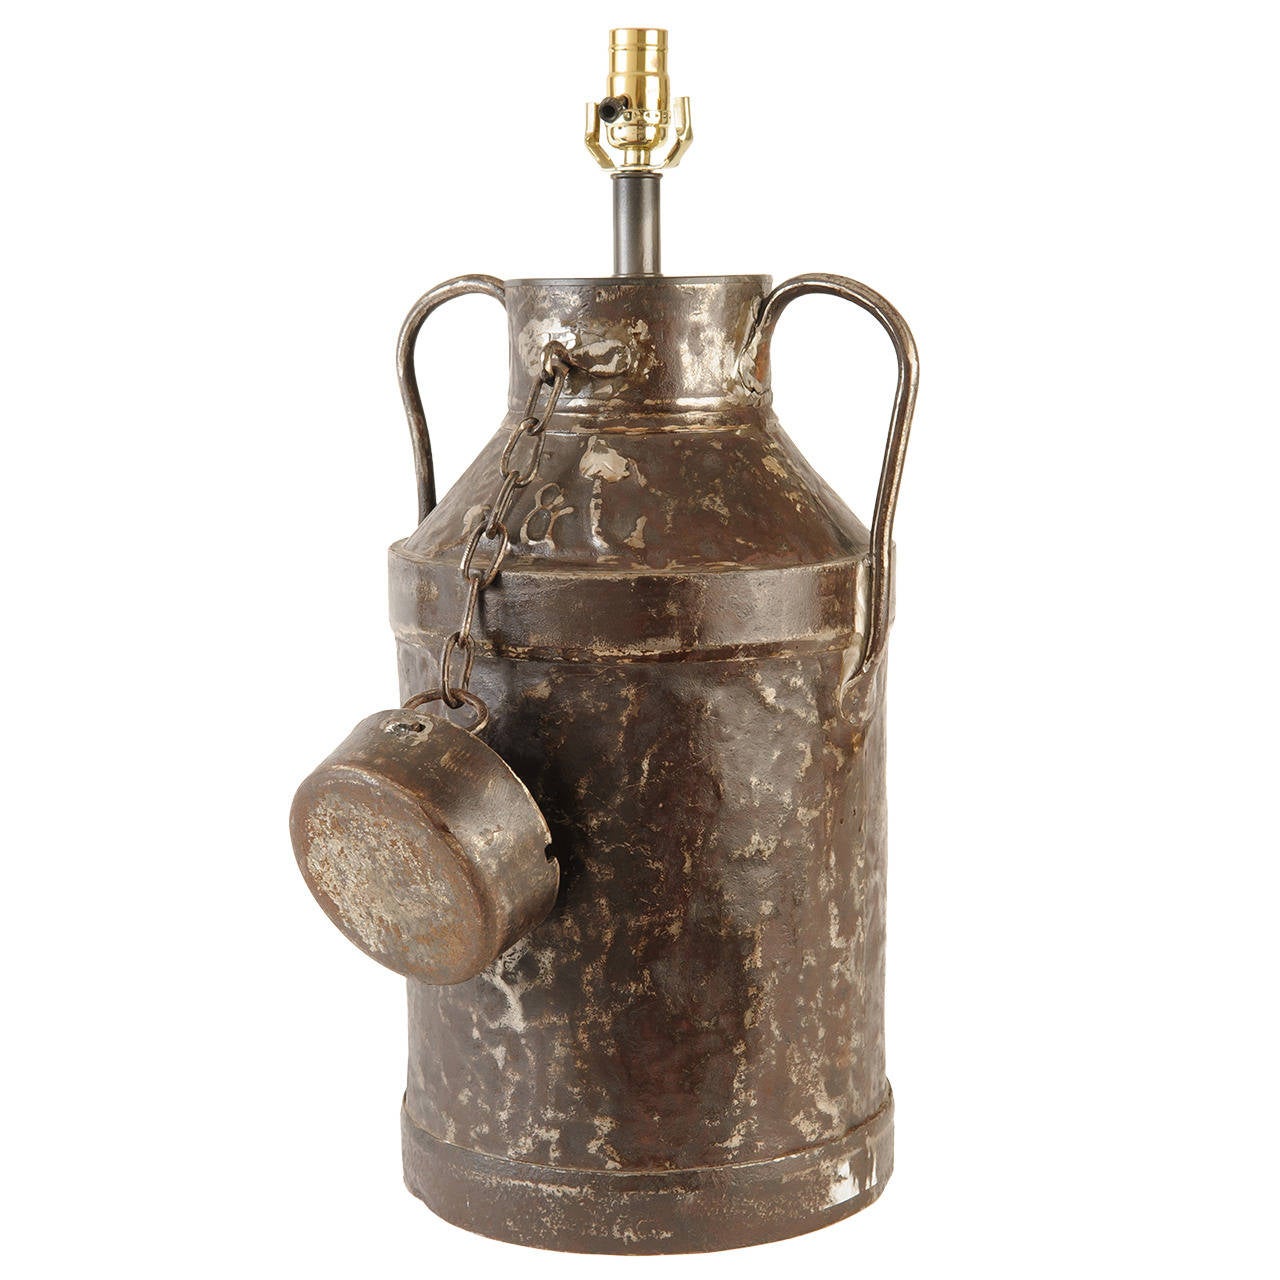 Pair of Metal French Milk Can Lamps For Sale at 1stdibs